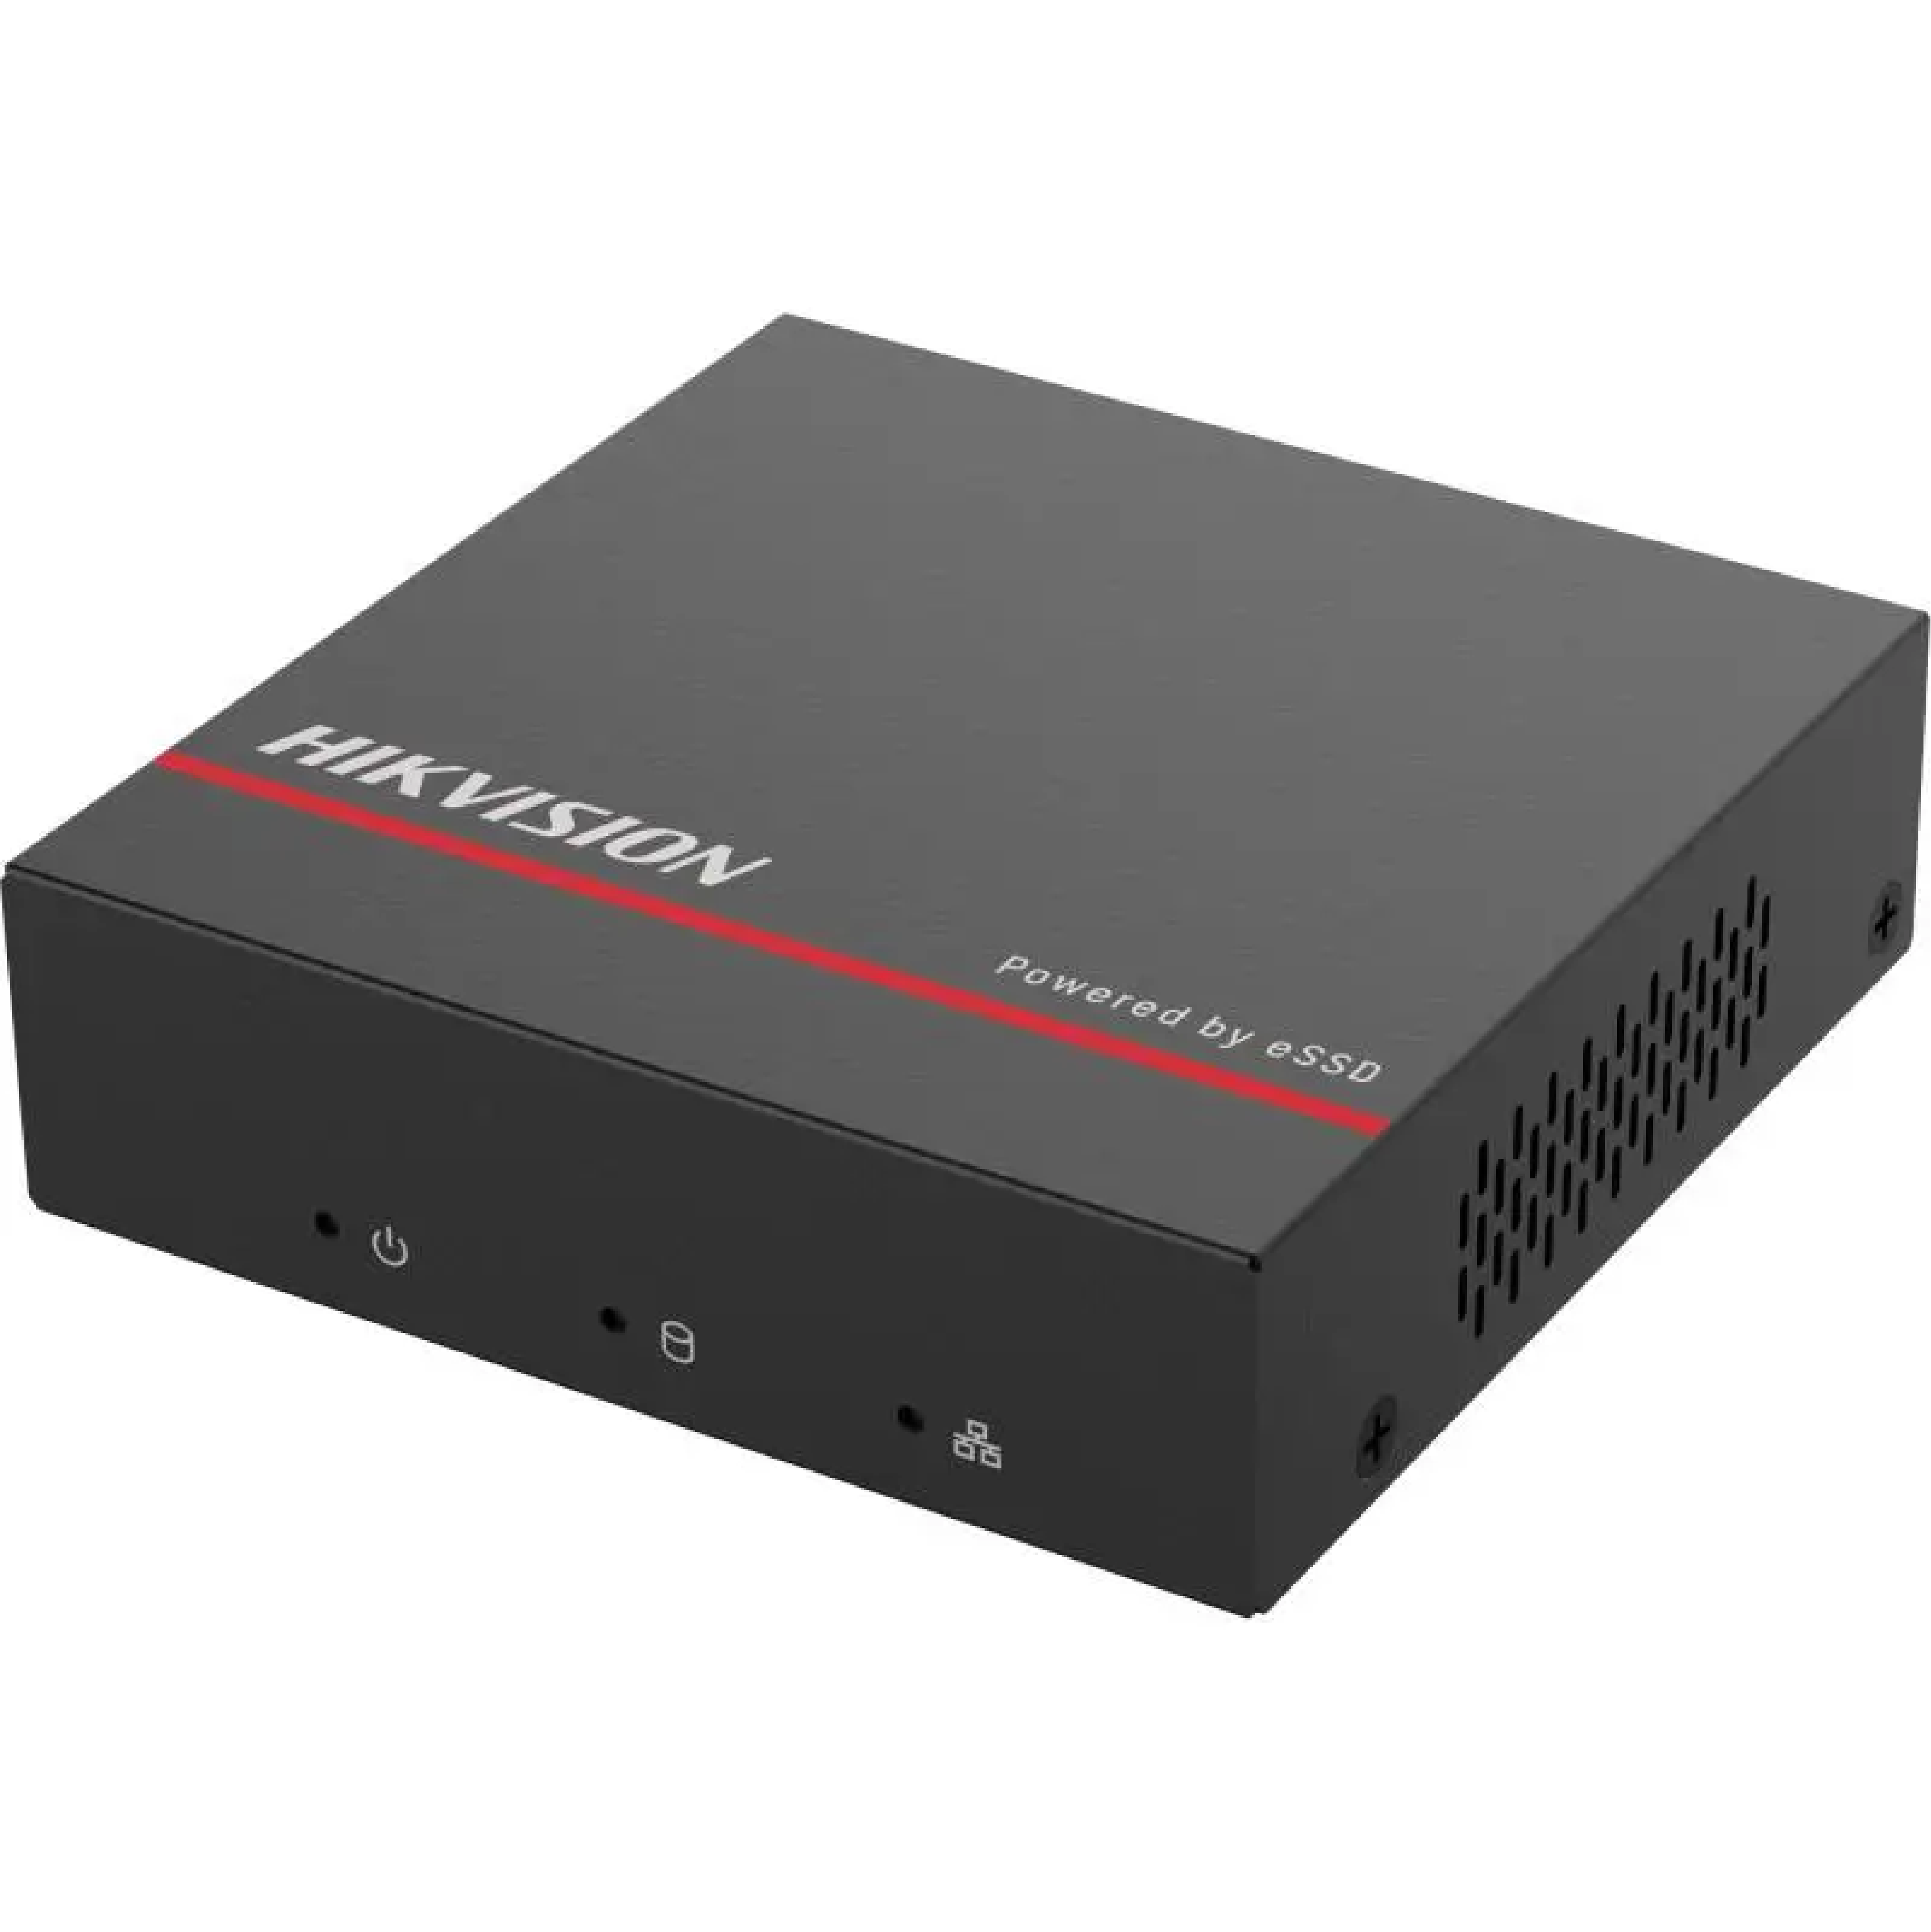 Hikvision DS-E04NI-Q1/4P(SSD 1T) SSD NVR 4 channel IP camera to 4MP with 4 x PoE, SSD 1TB